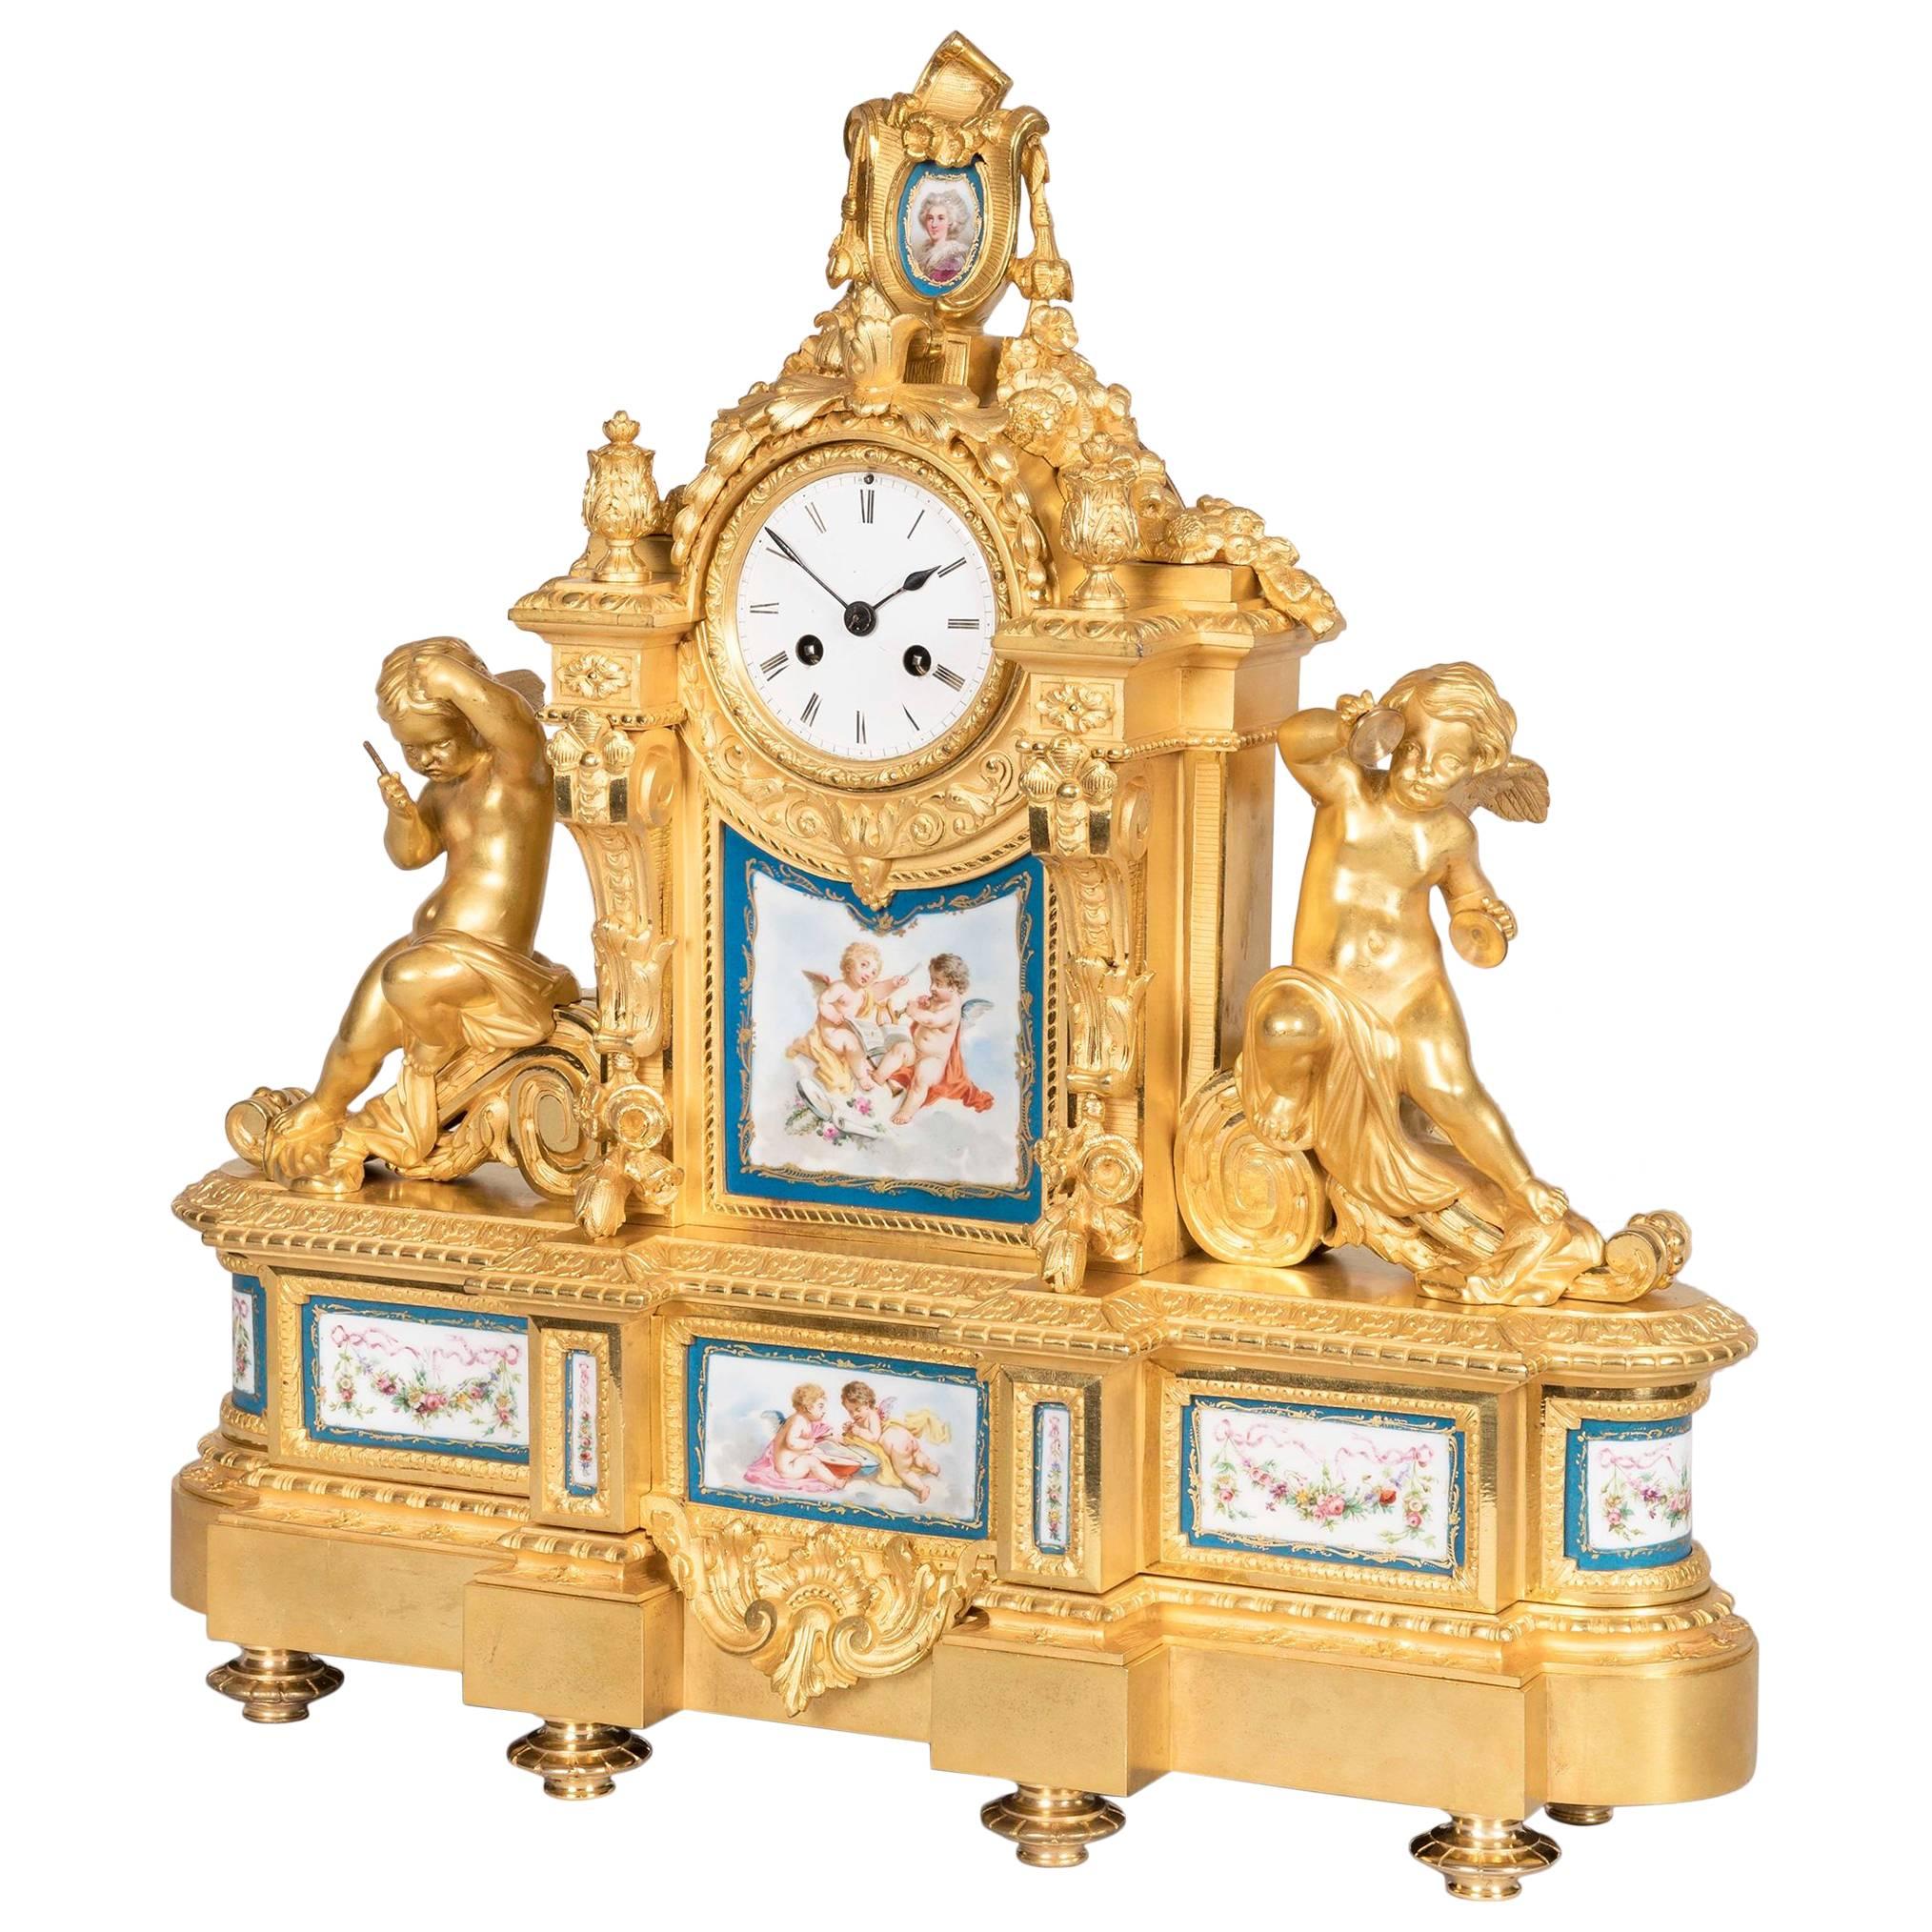 19th Century French Gilt Bronze and Porcelain Clock in the Louis XVI Taste For Sale